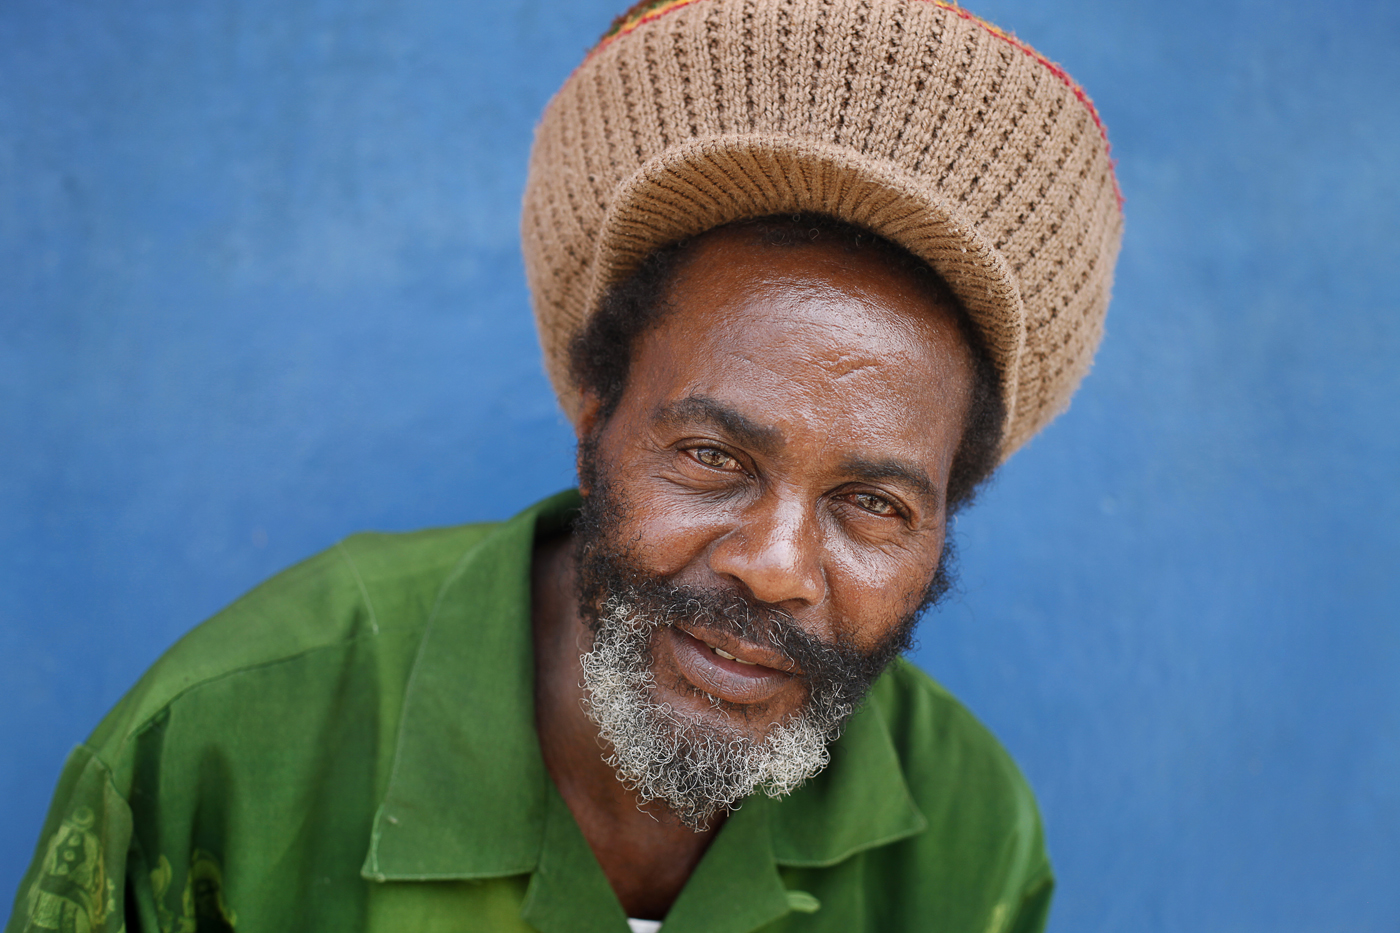 Colourful Portraits of The Jamaican People | The Lovepost1400 x 933